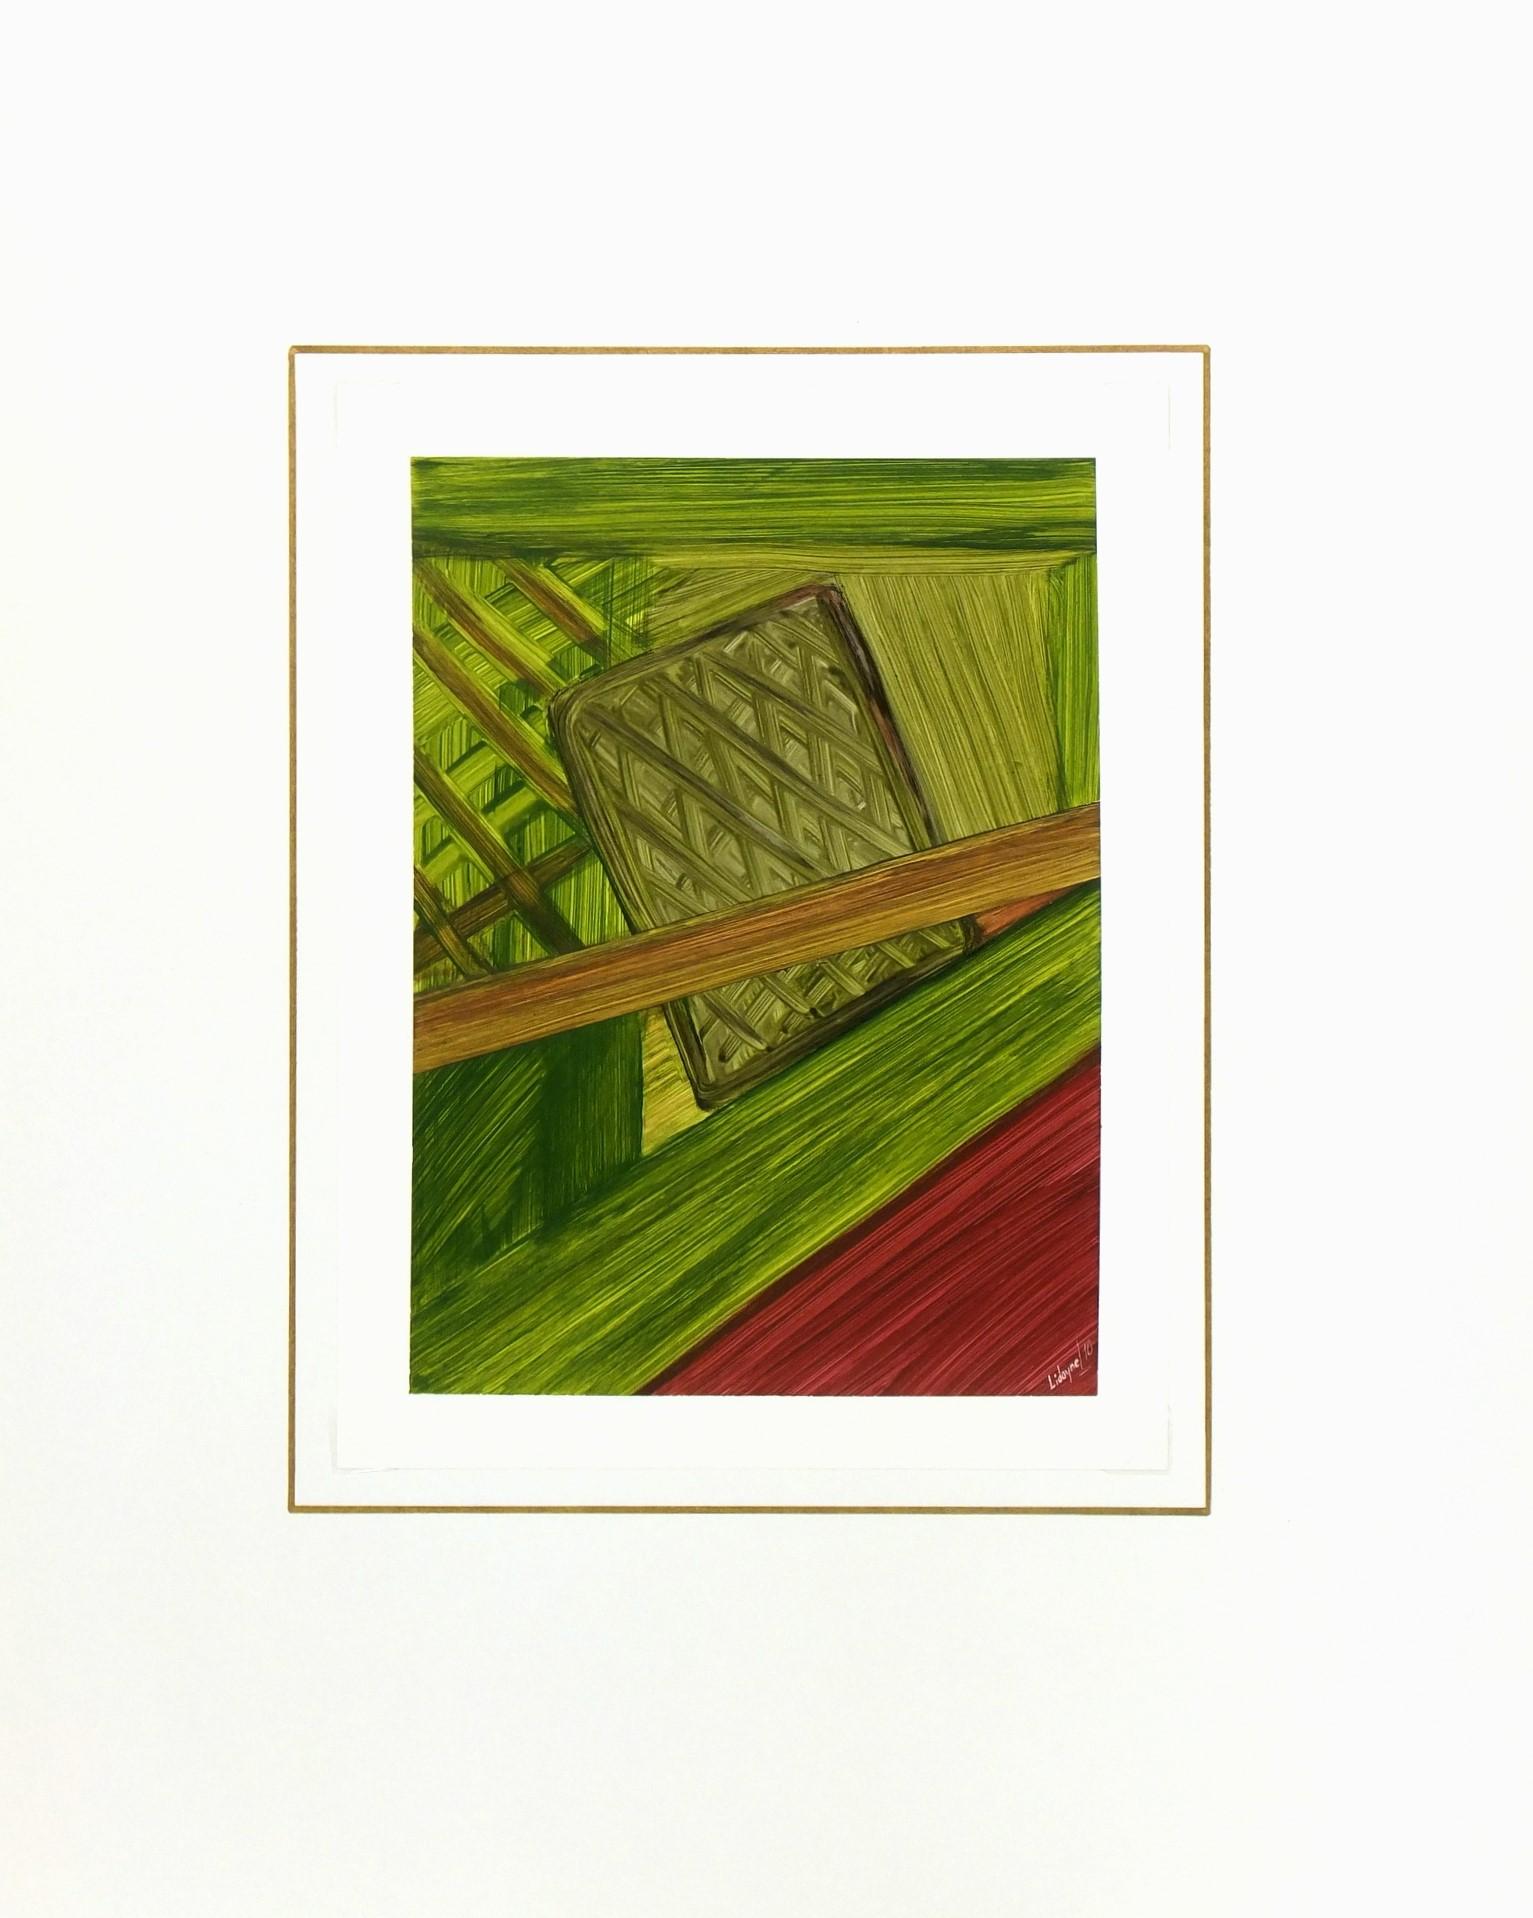 Abstract acrylic in earthy hues of green and accented in a deep maroon by Mexican artist Lidoyne, 2010.  Signed and dated lower right.

Original vintage one-of-a-kind artwork on paper displayed on a white mat with a gold border. Mat fits a